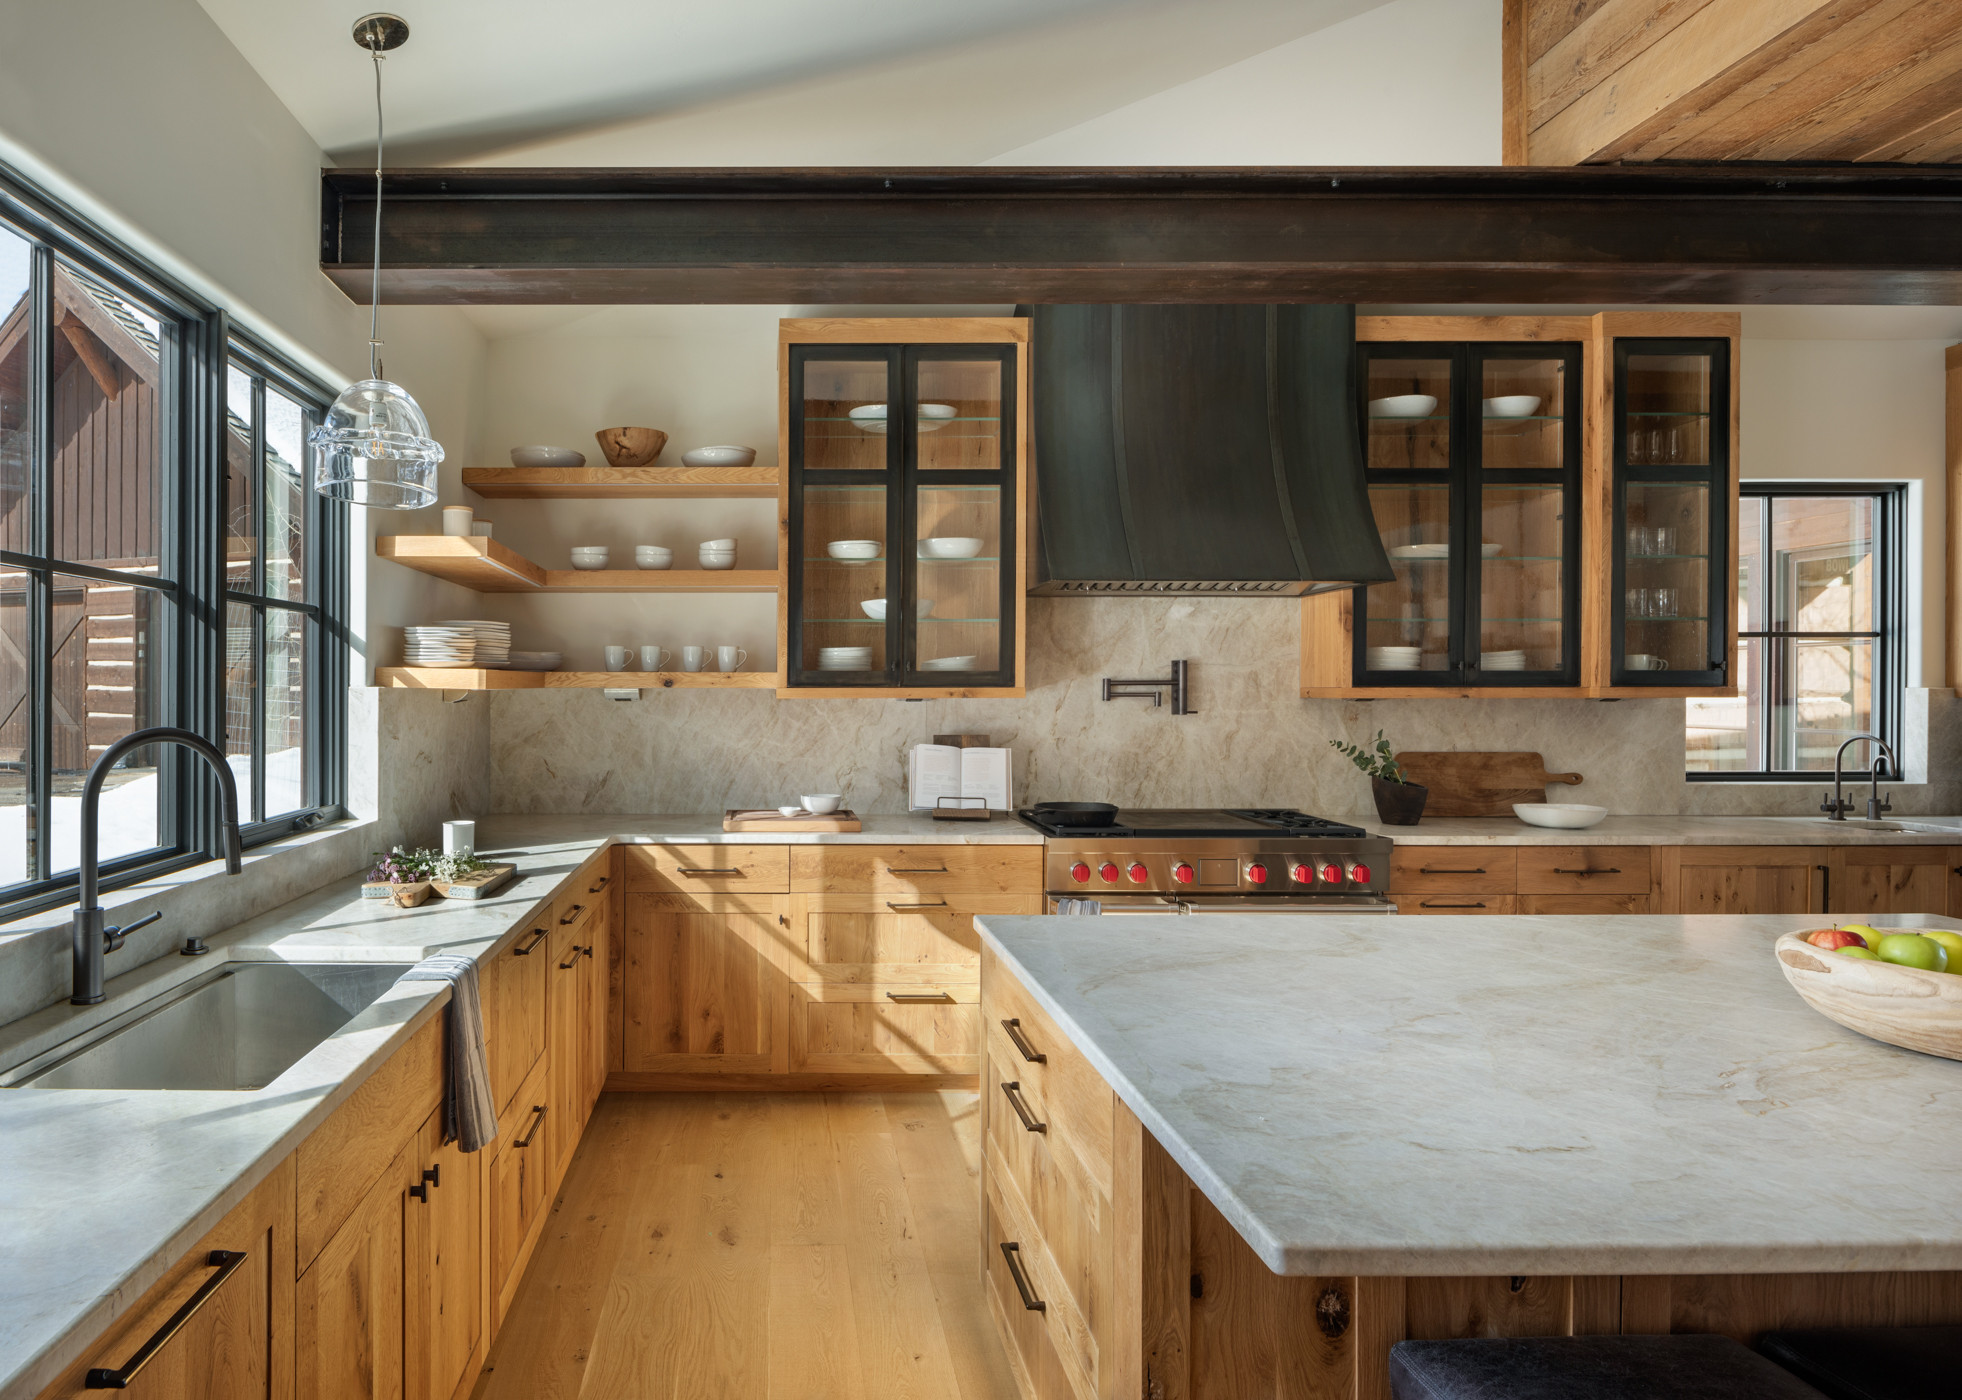 How Much Do Kitchen Countertops Cost?